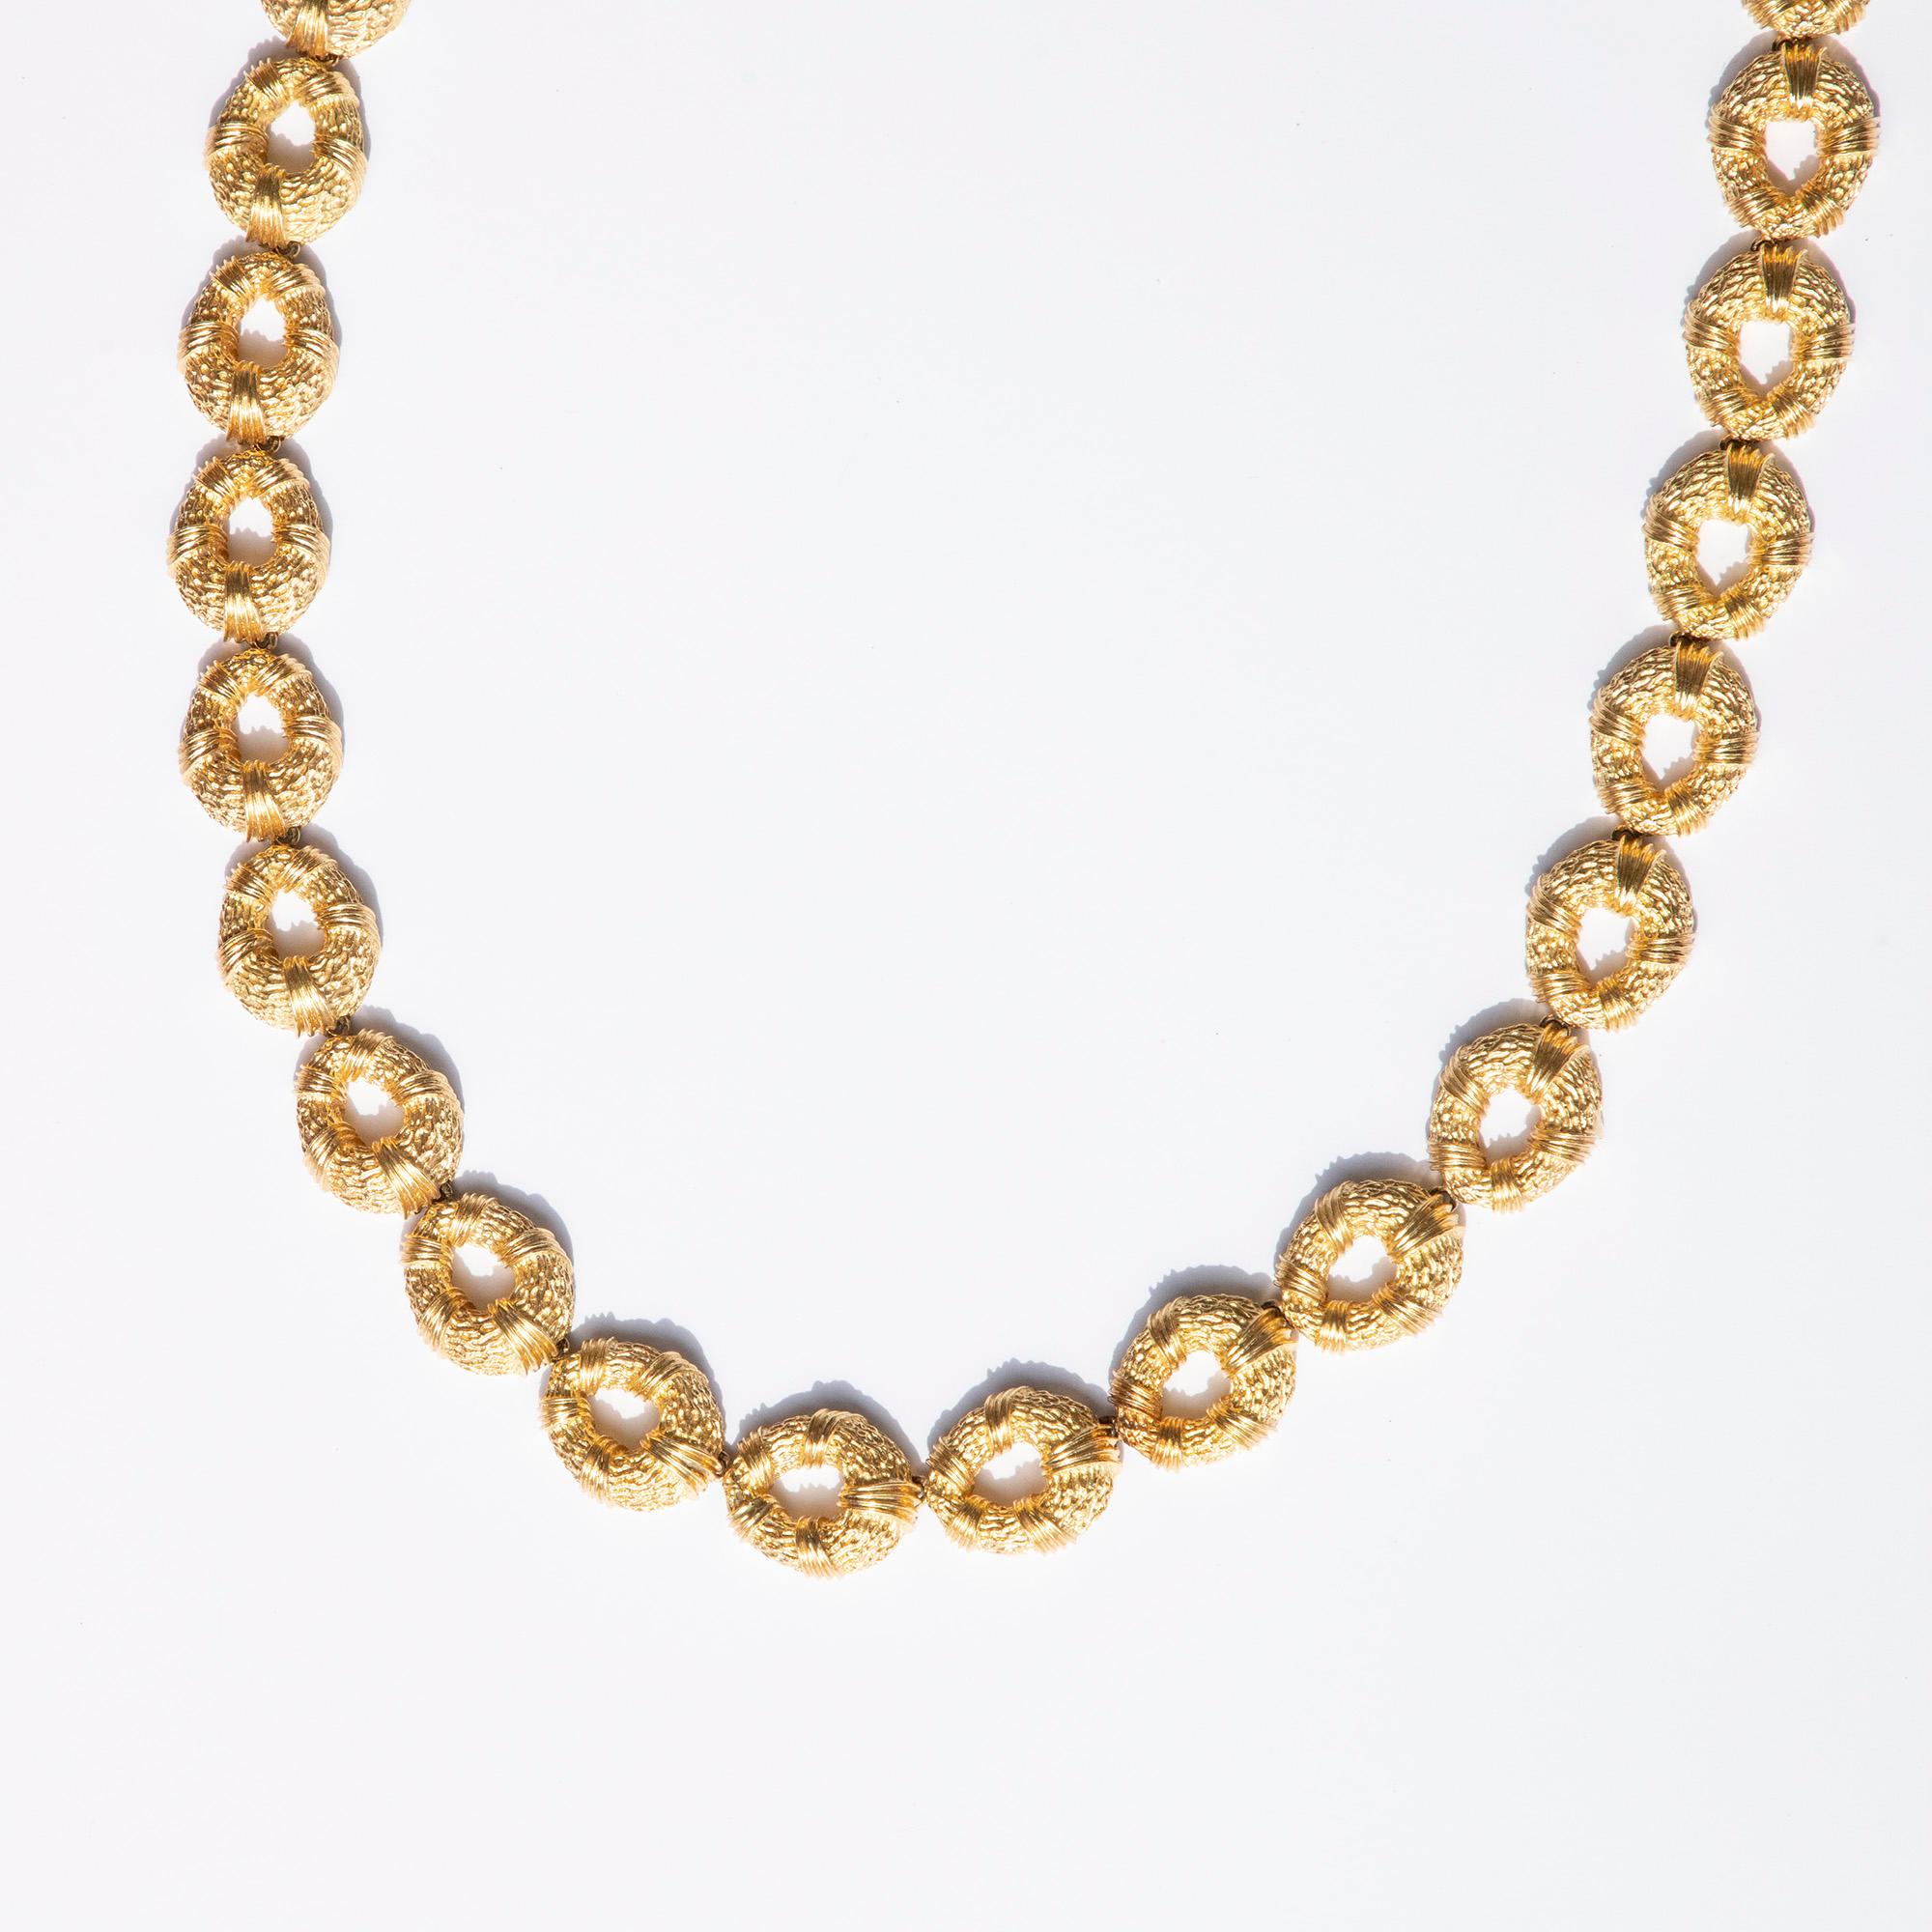 Vintage 18k Yellow Gold Oval Link Necklace For Sale 4